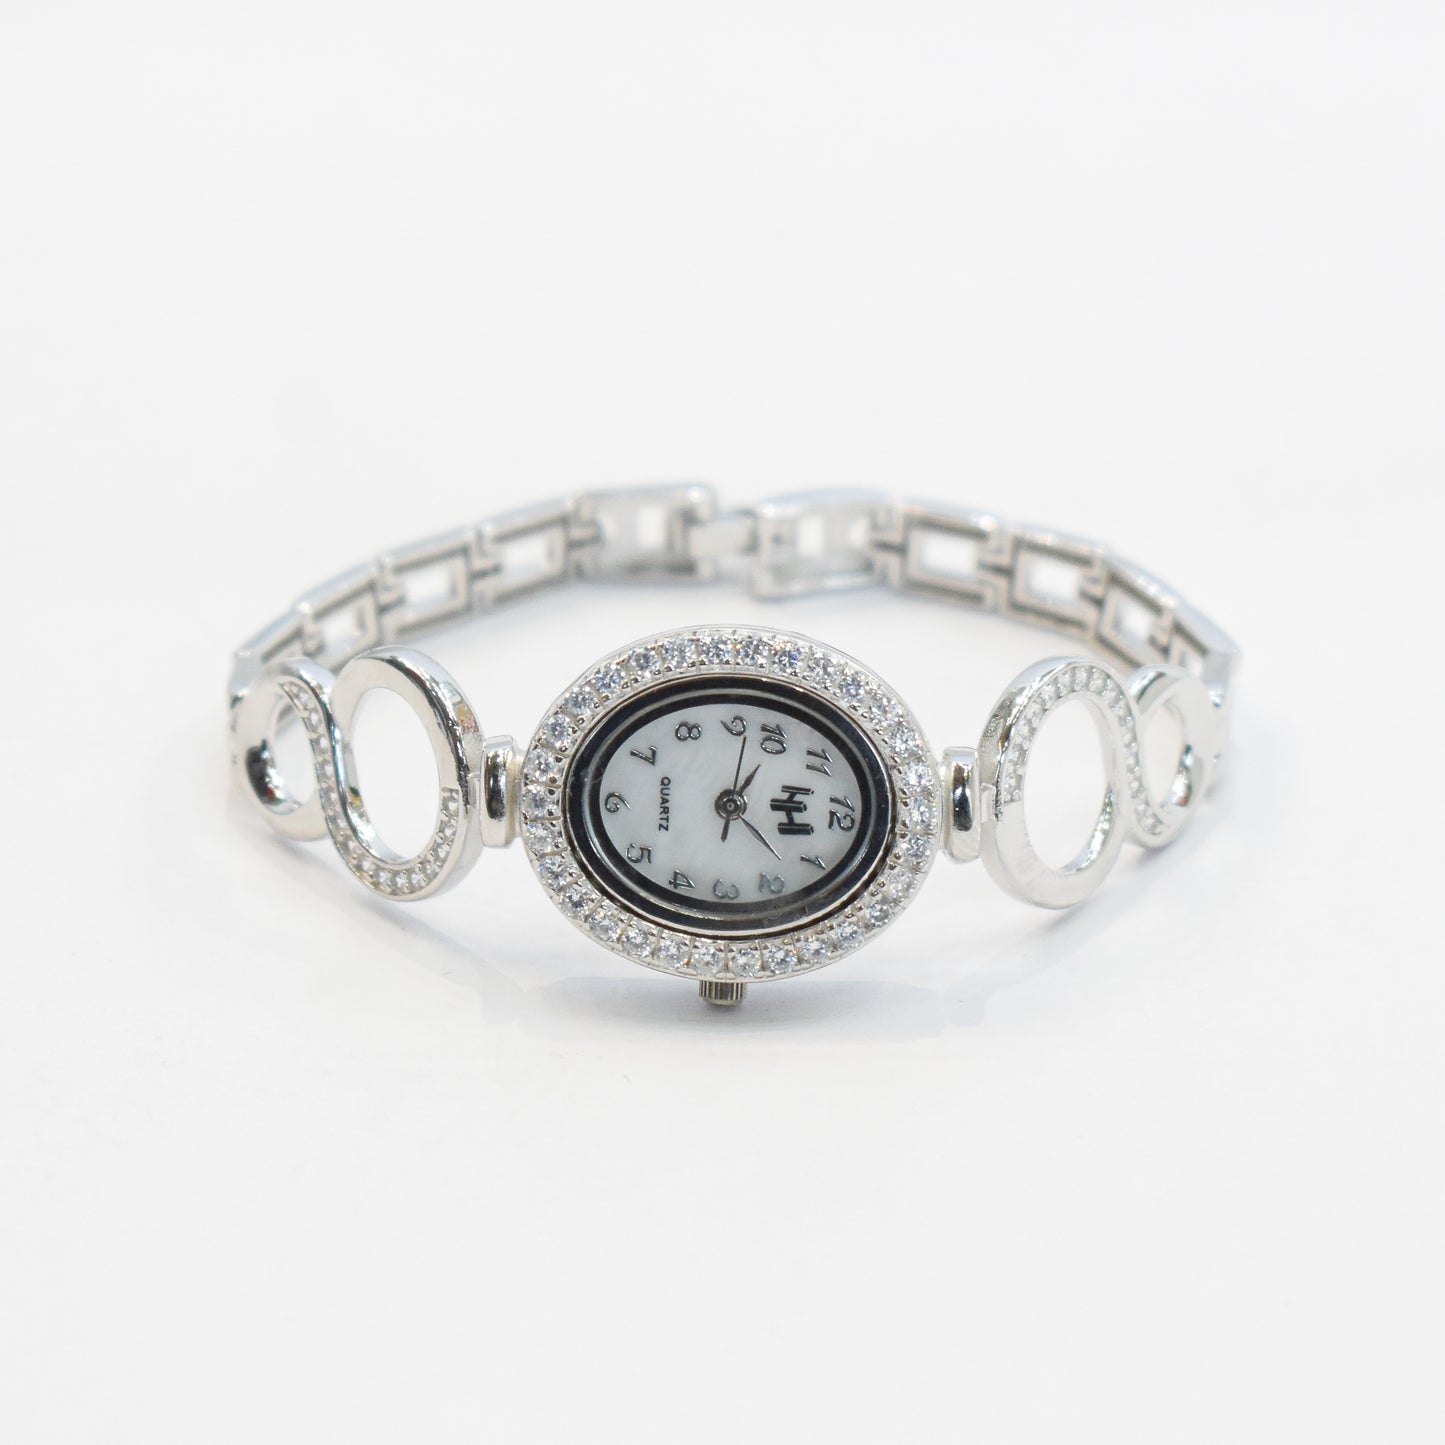 Candrin Siona 925 Sterling Silver Watch